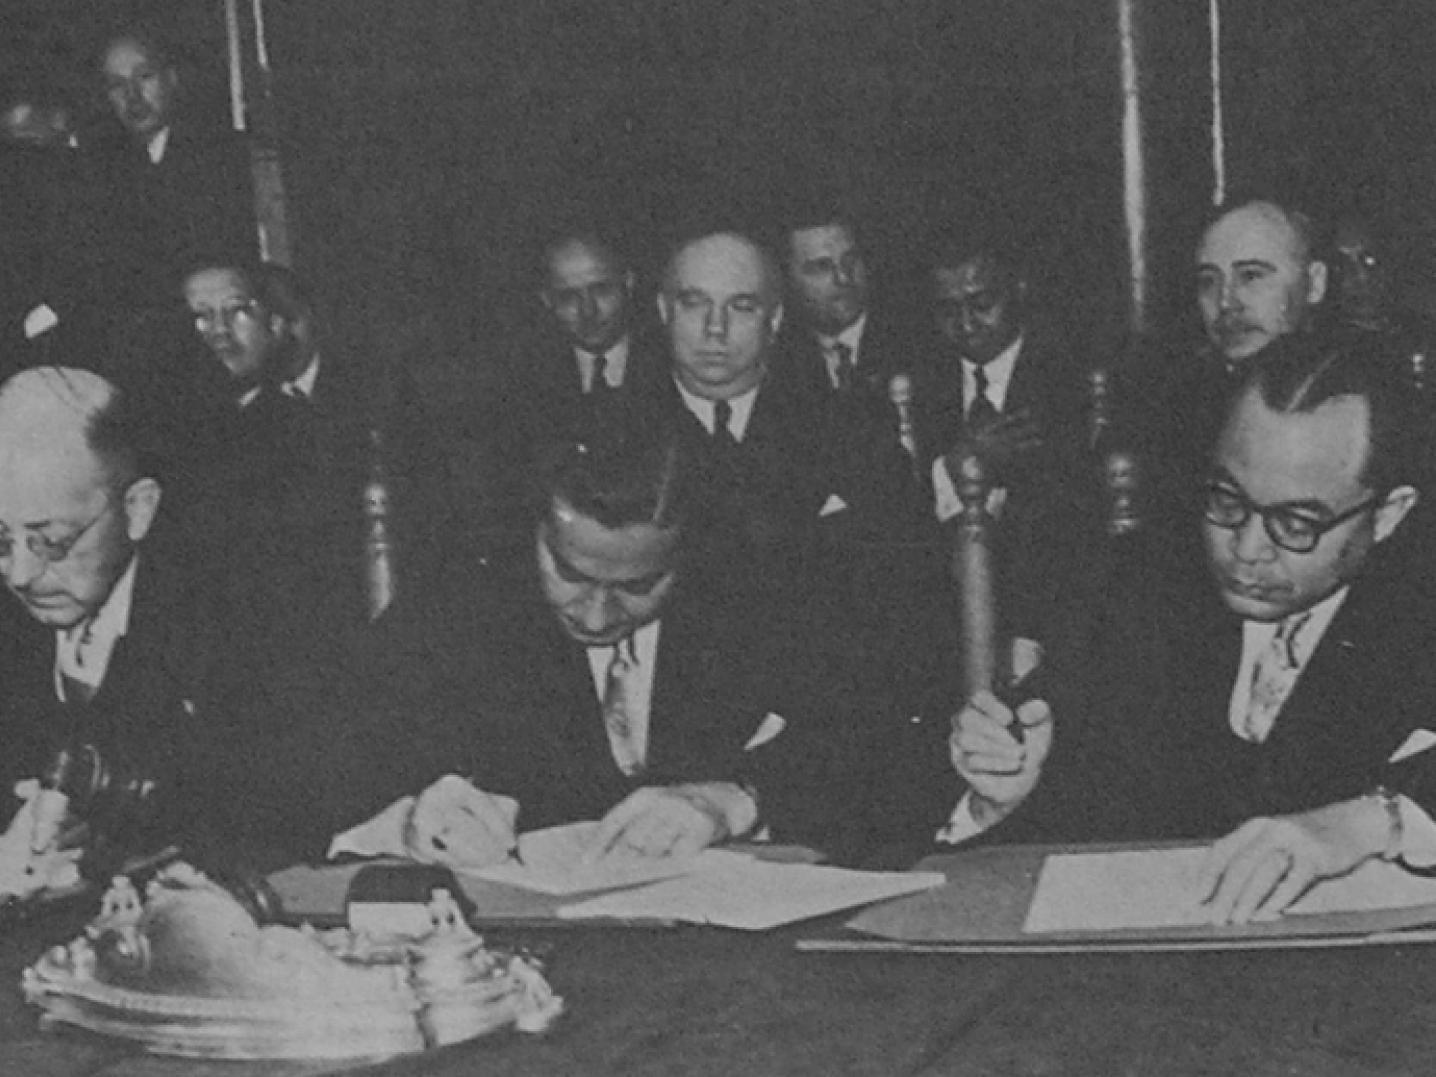 a group of Dutch and Indonesian men signing a paper during the Dutch-Indonesian Round Table Agreement in 1949